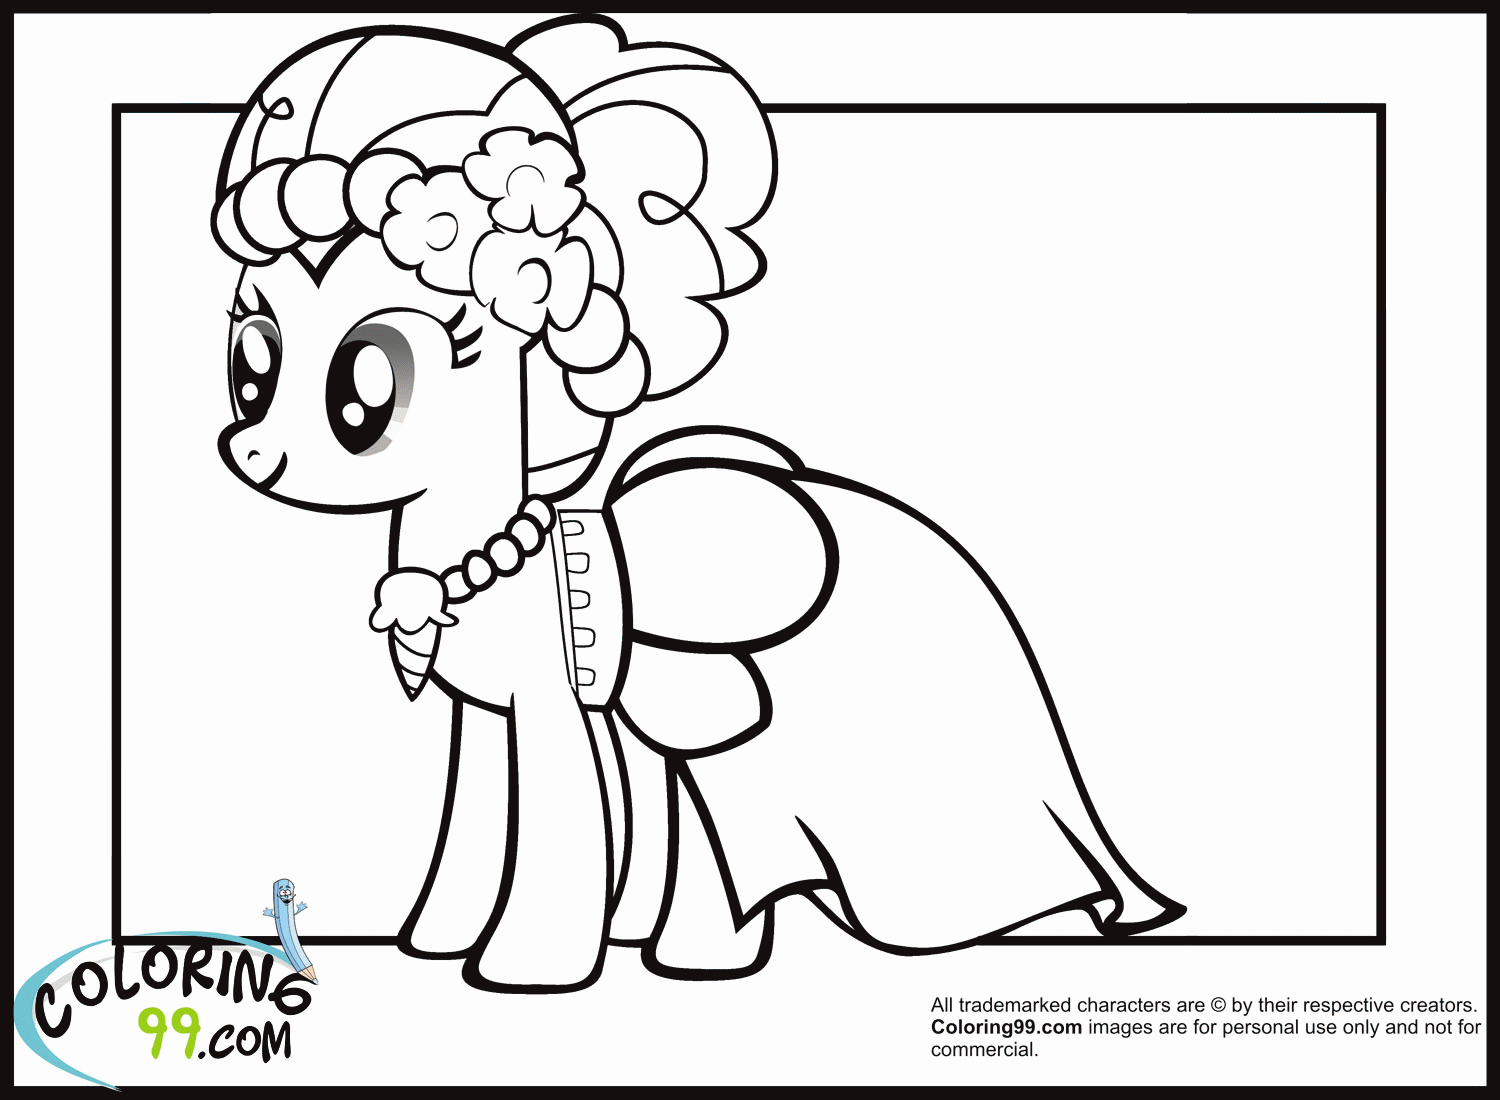 My Little Pony Pinkie Pie Coloring Pages | Team colors